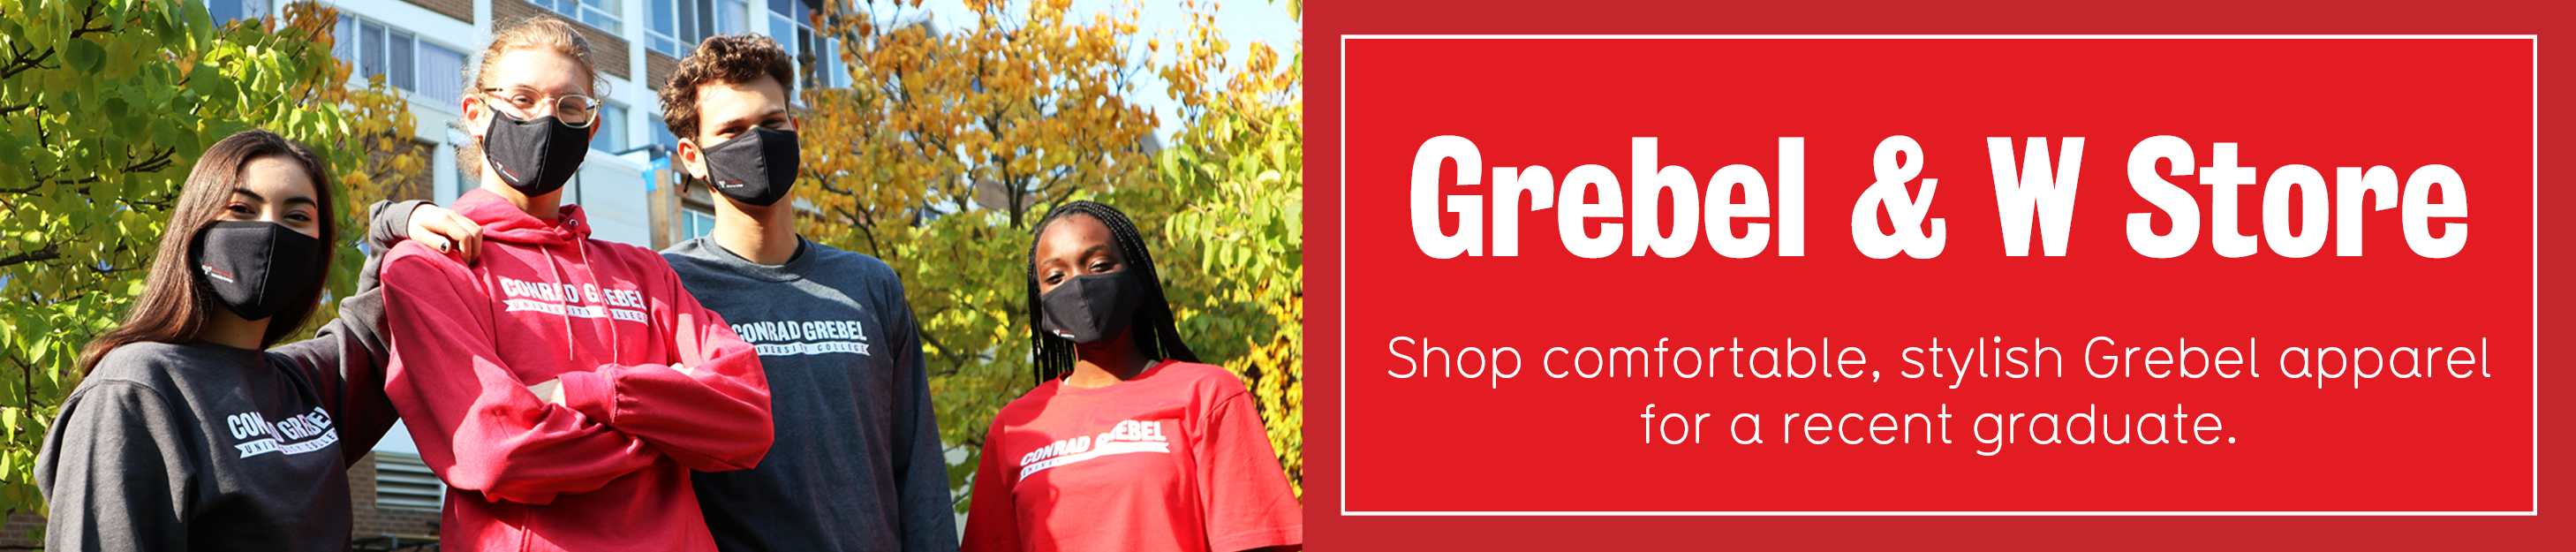 WSTORE now carries Grebel themed apparel